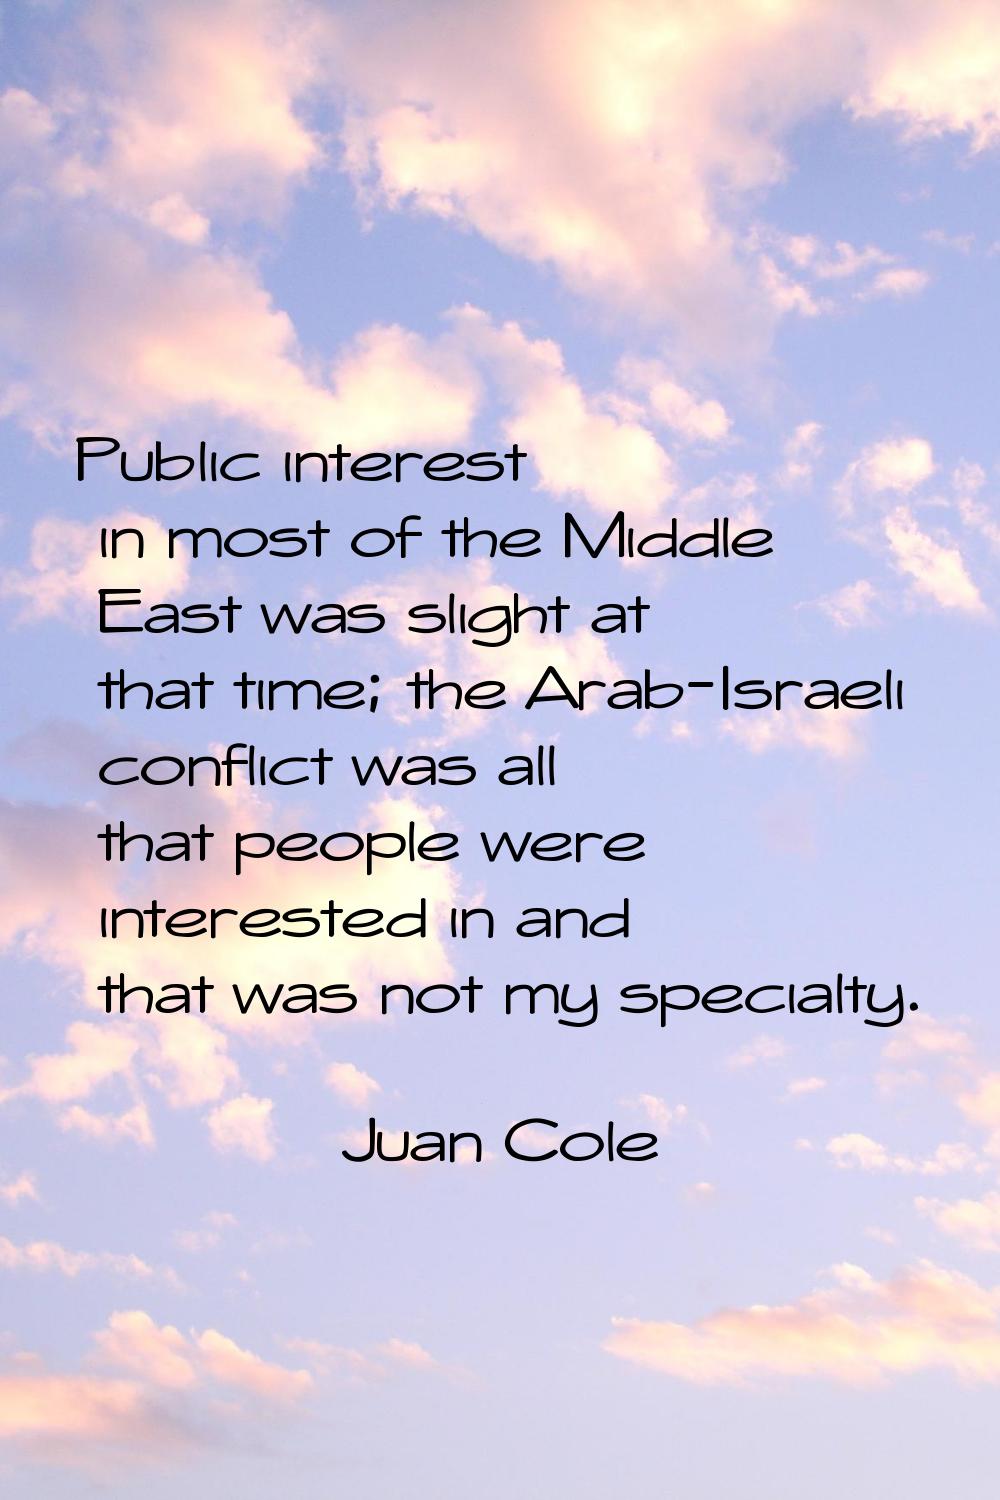 Public interest in most of the Middle East was slight at that time; the Arab-Israeli conflict was a